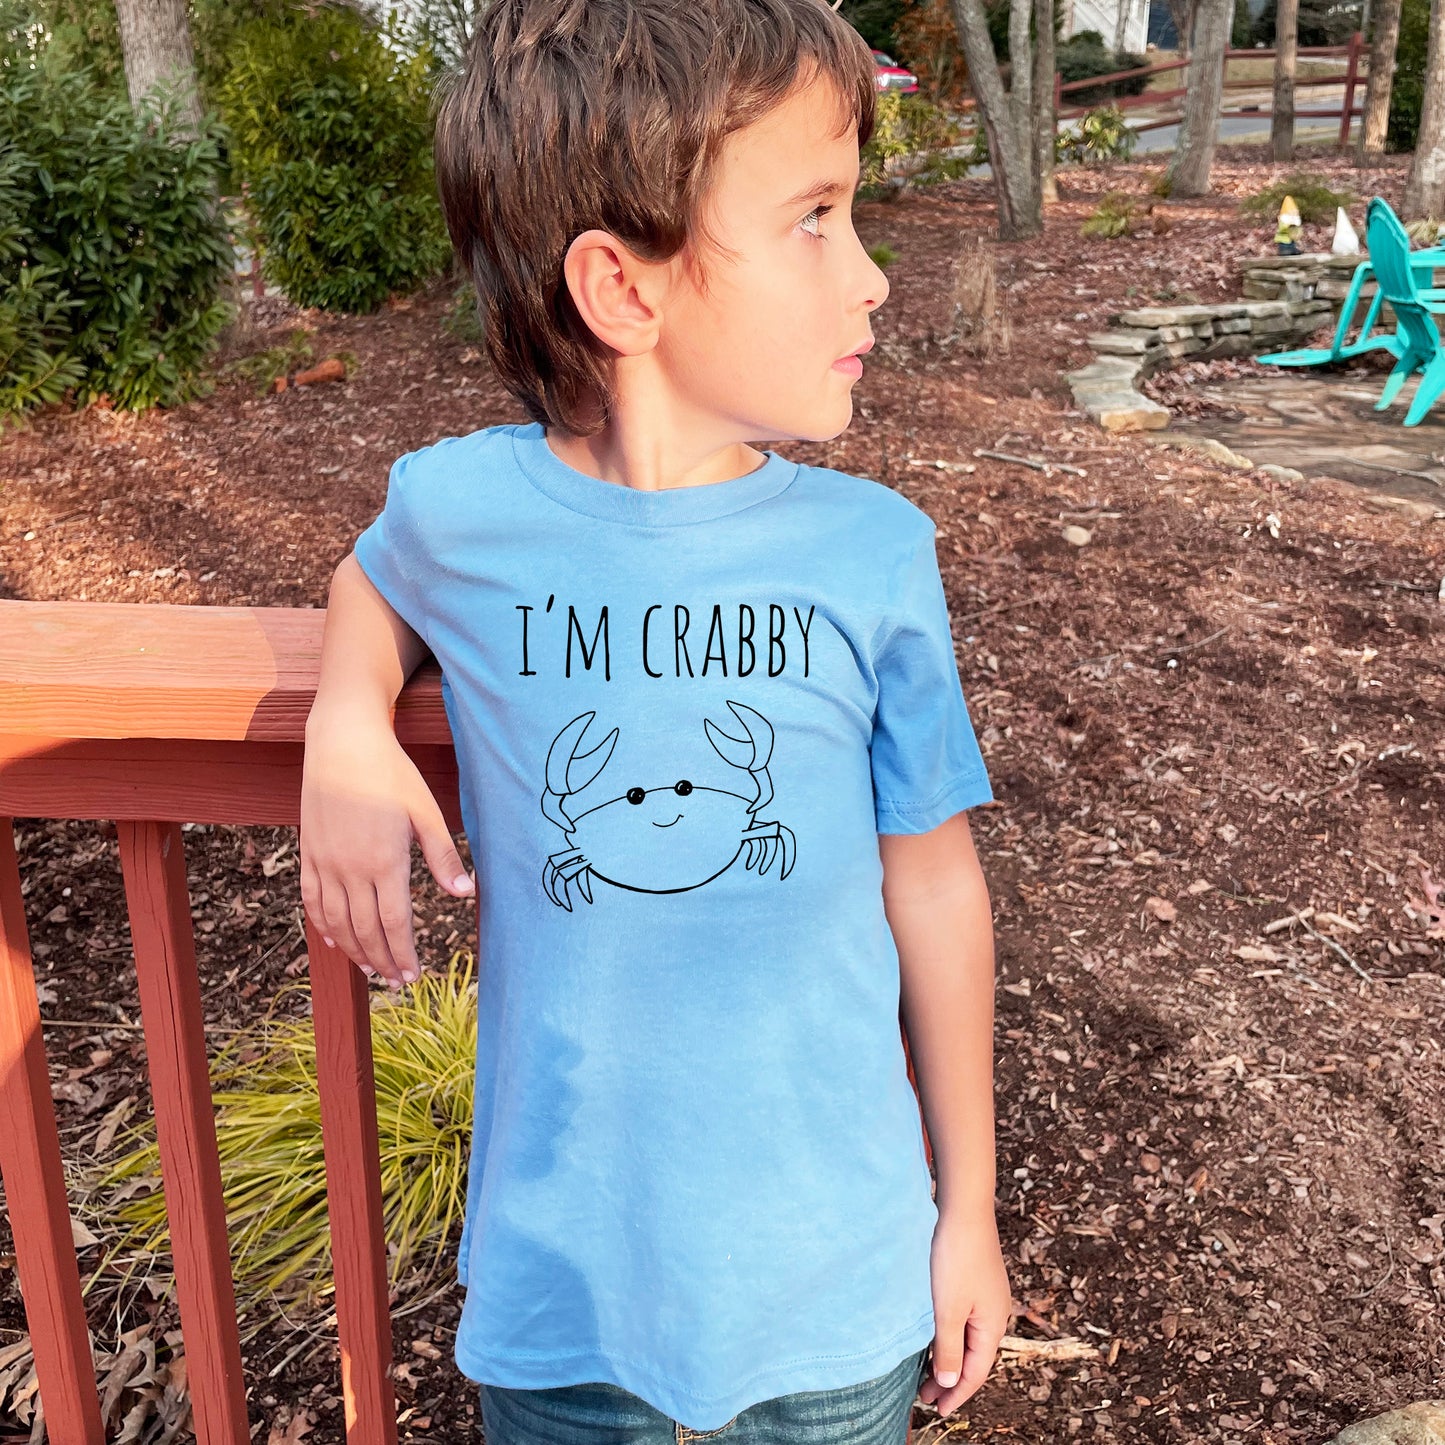 I'm Crabby - Kid's Tee - Columbia Blue or Lavender